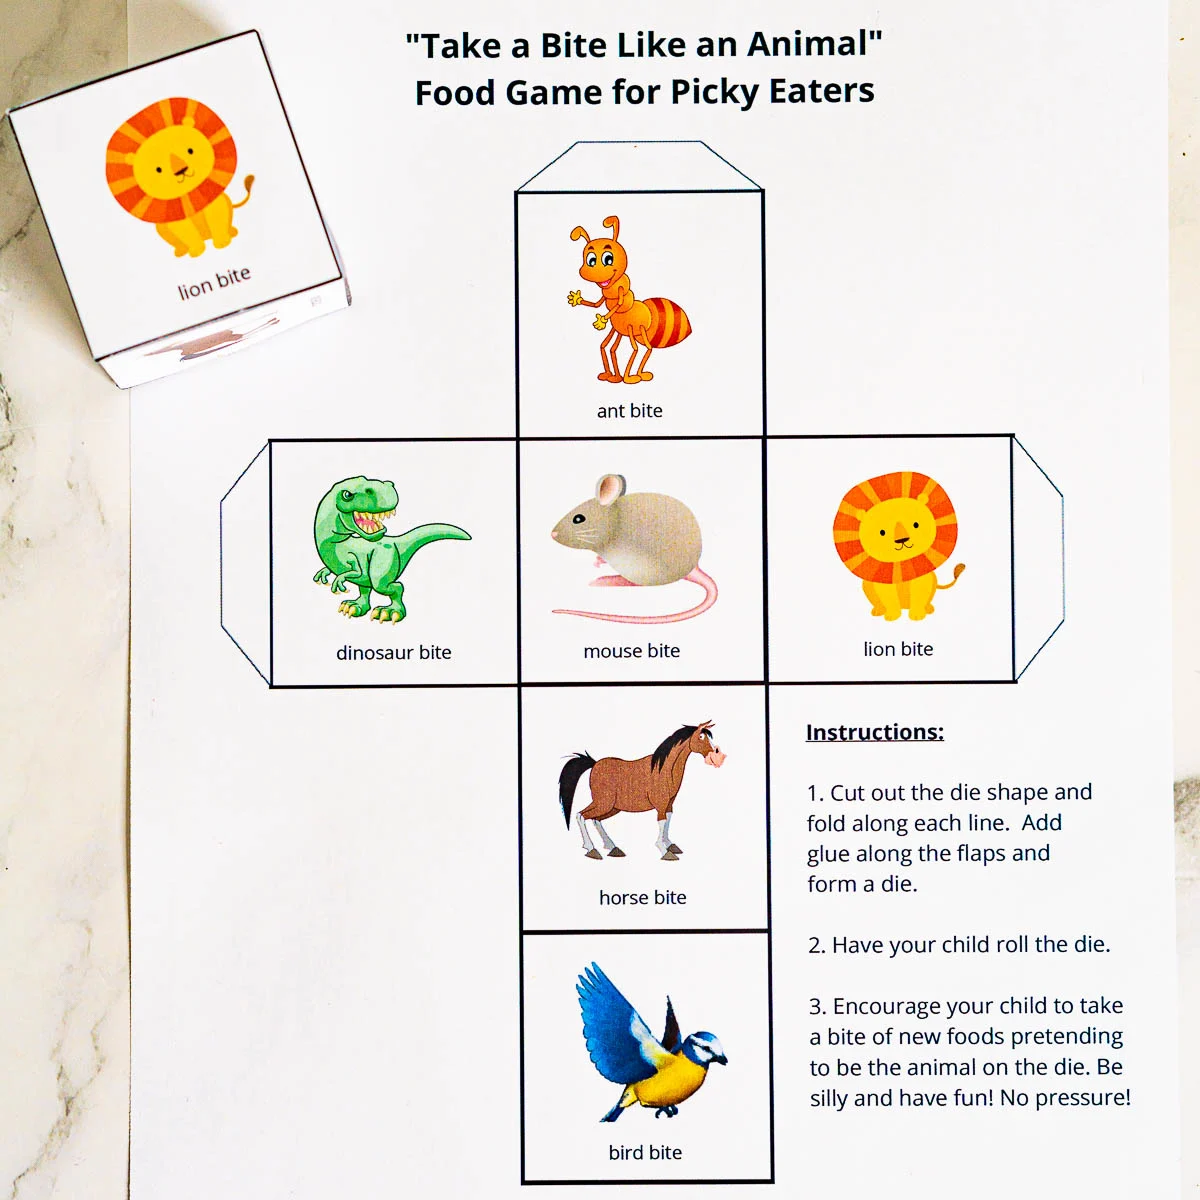 Printout and example of animal dice game for picky eaters